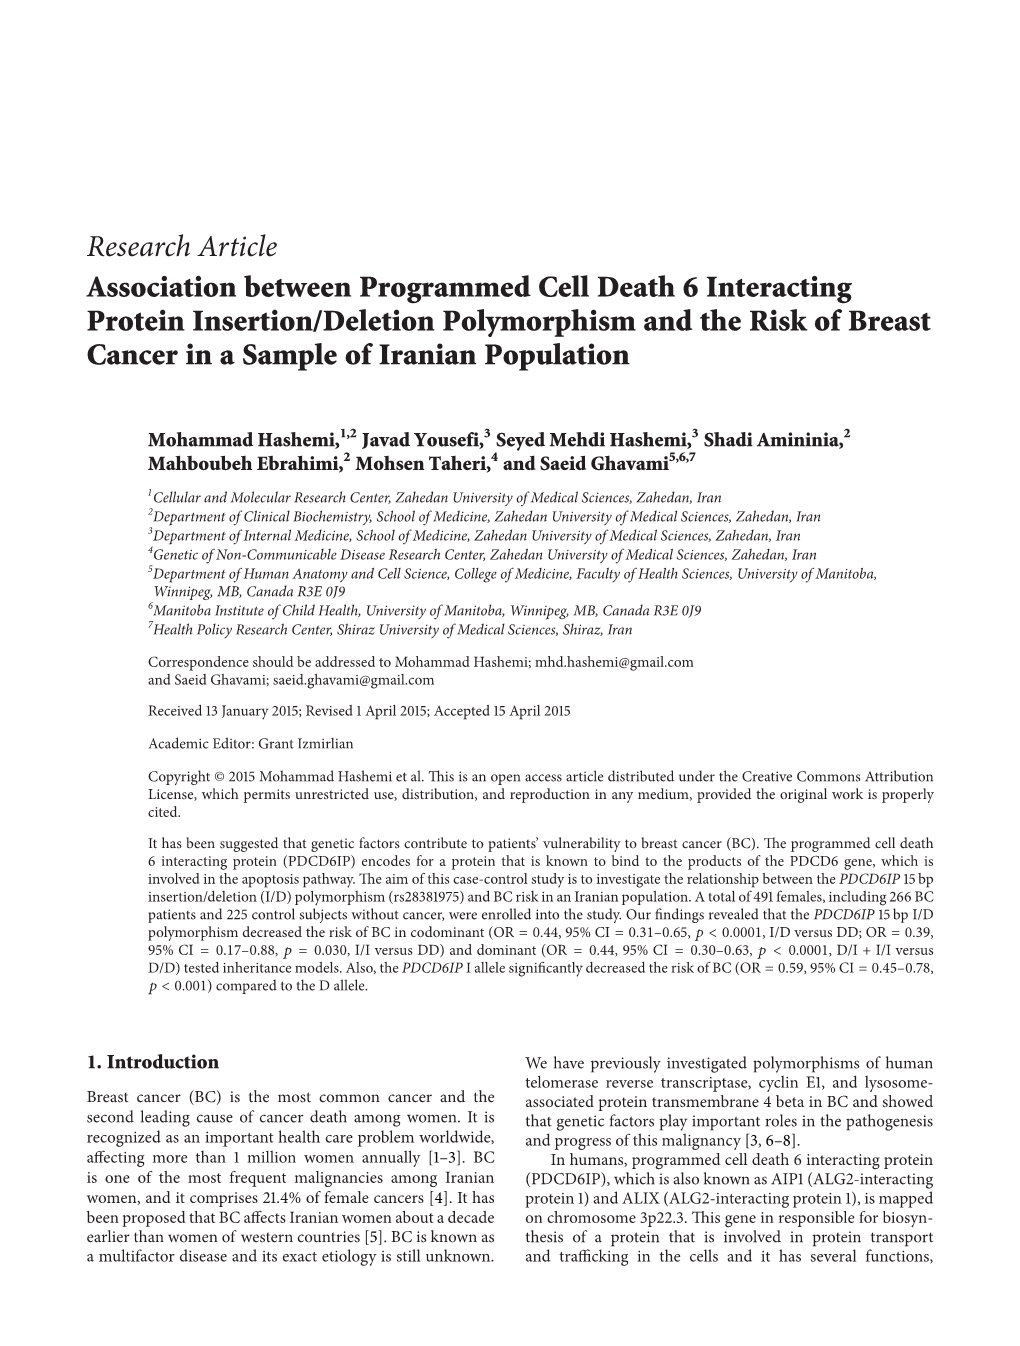 Research Article Association Between Programmed Cell Death 6 Interacting Protein Insertion/Deletion Polymorphism and the Risk Of